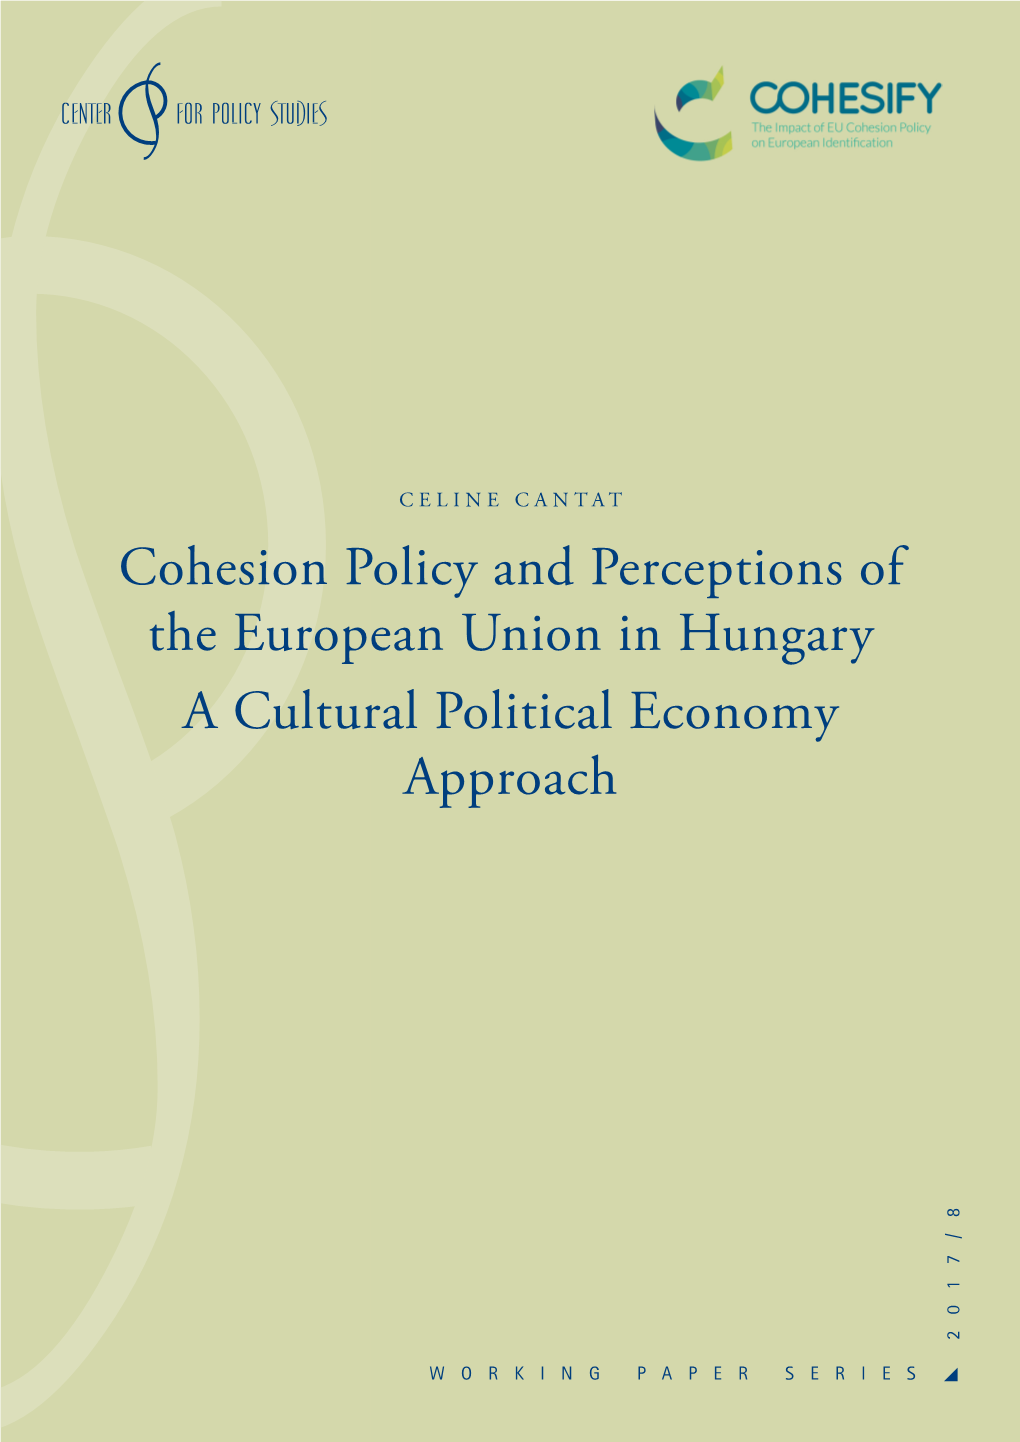 Cohesion Policy and Perceptions of the European Union in Hungary